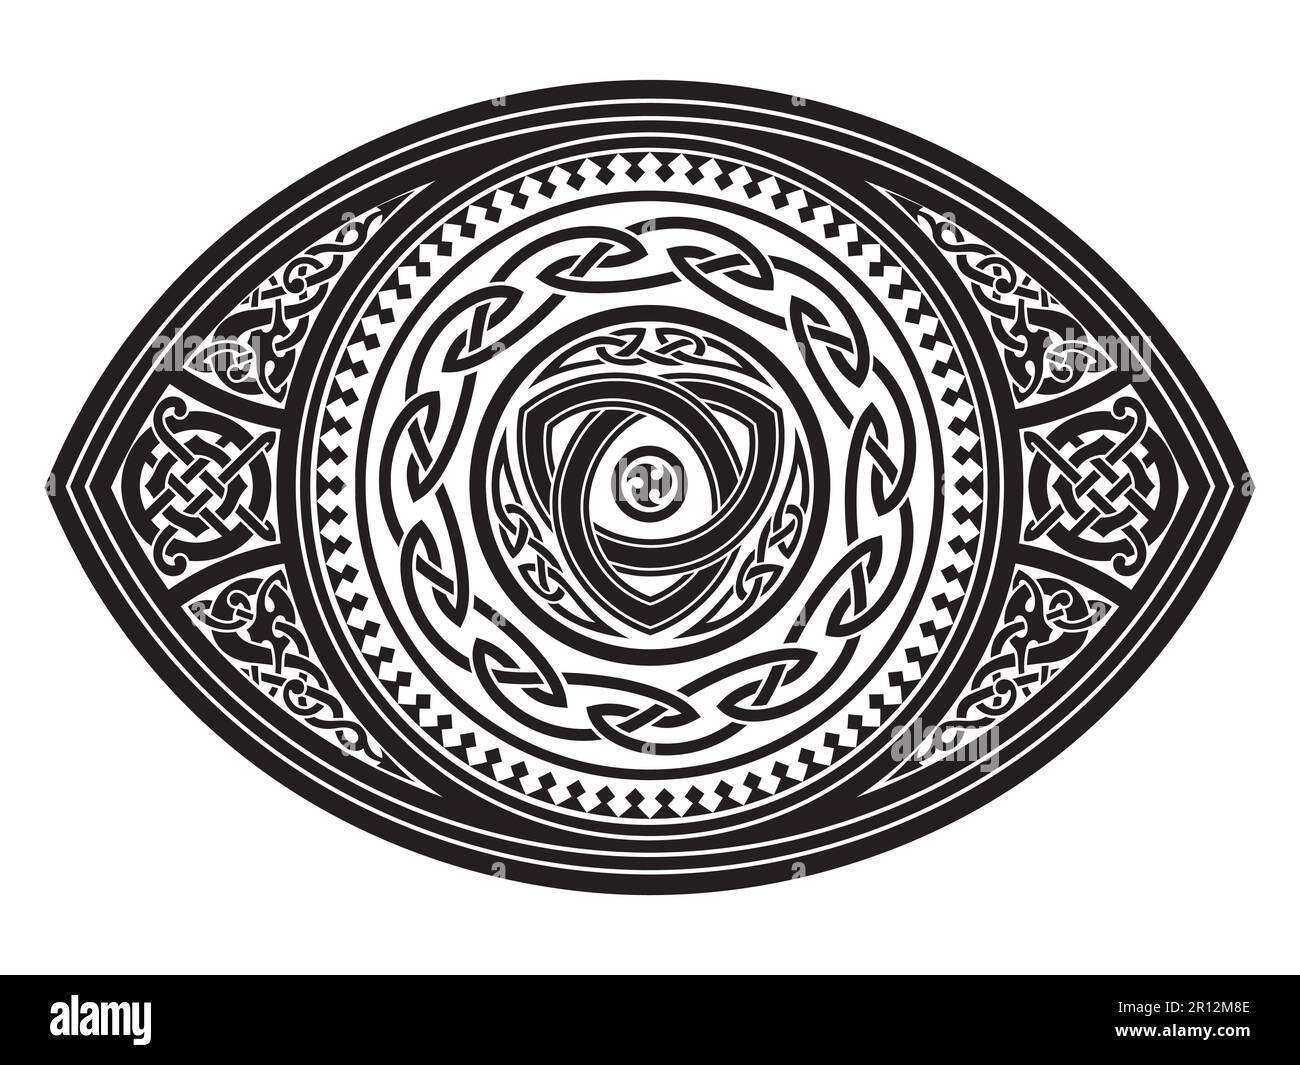 Scandinavian Viking design. Round Celtic design in Old Norse style Stock Vector